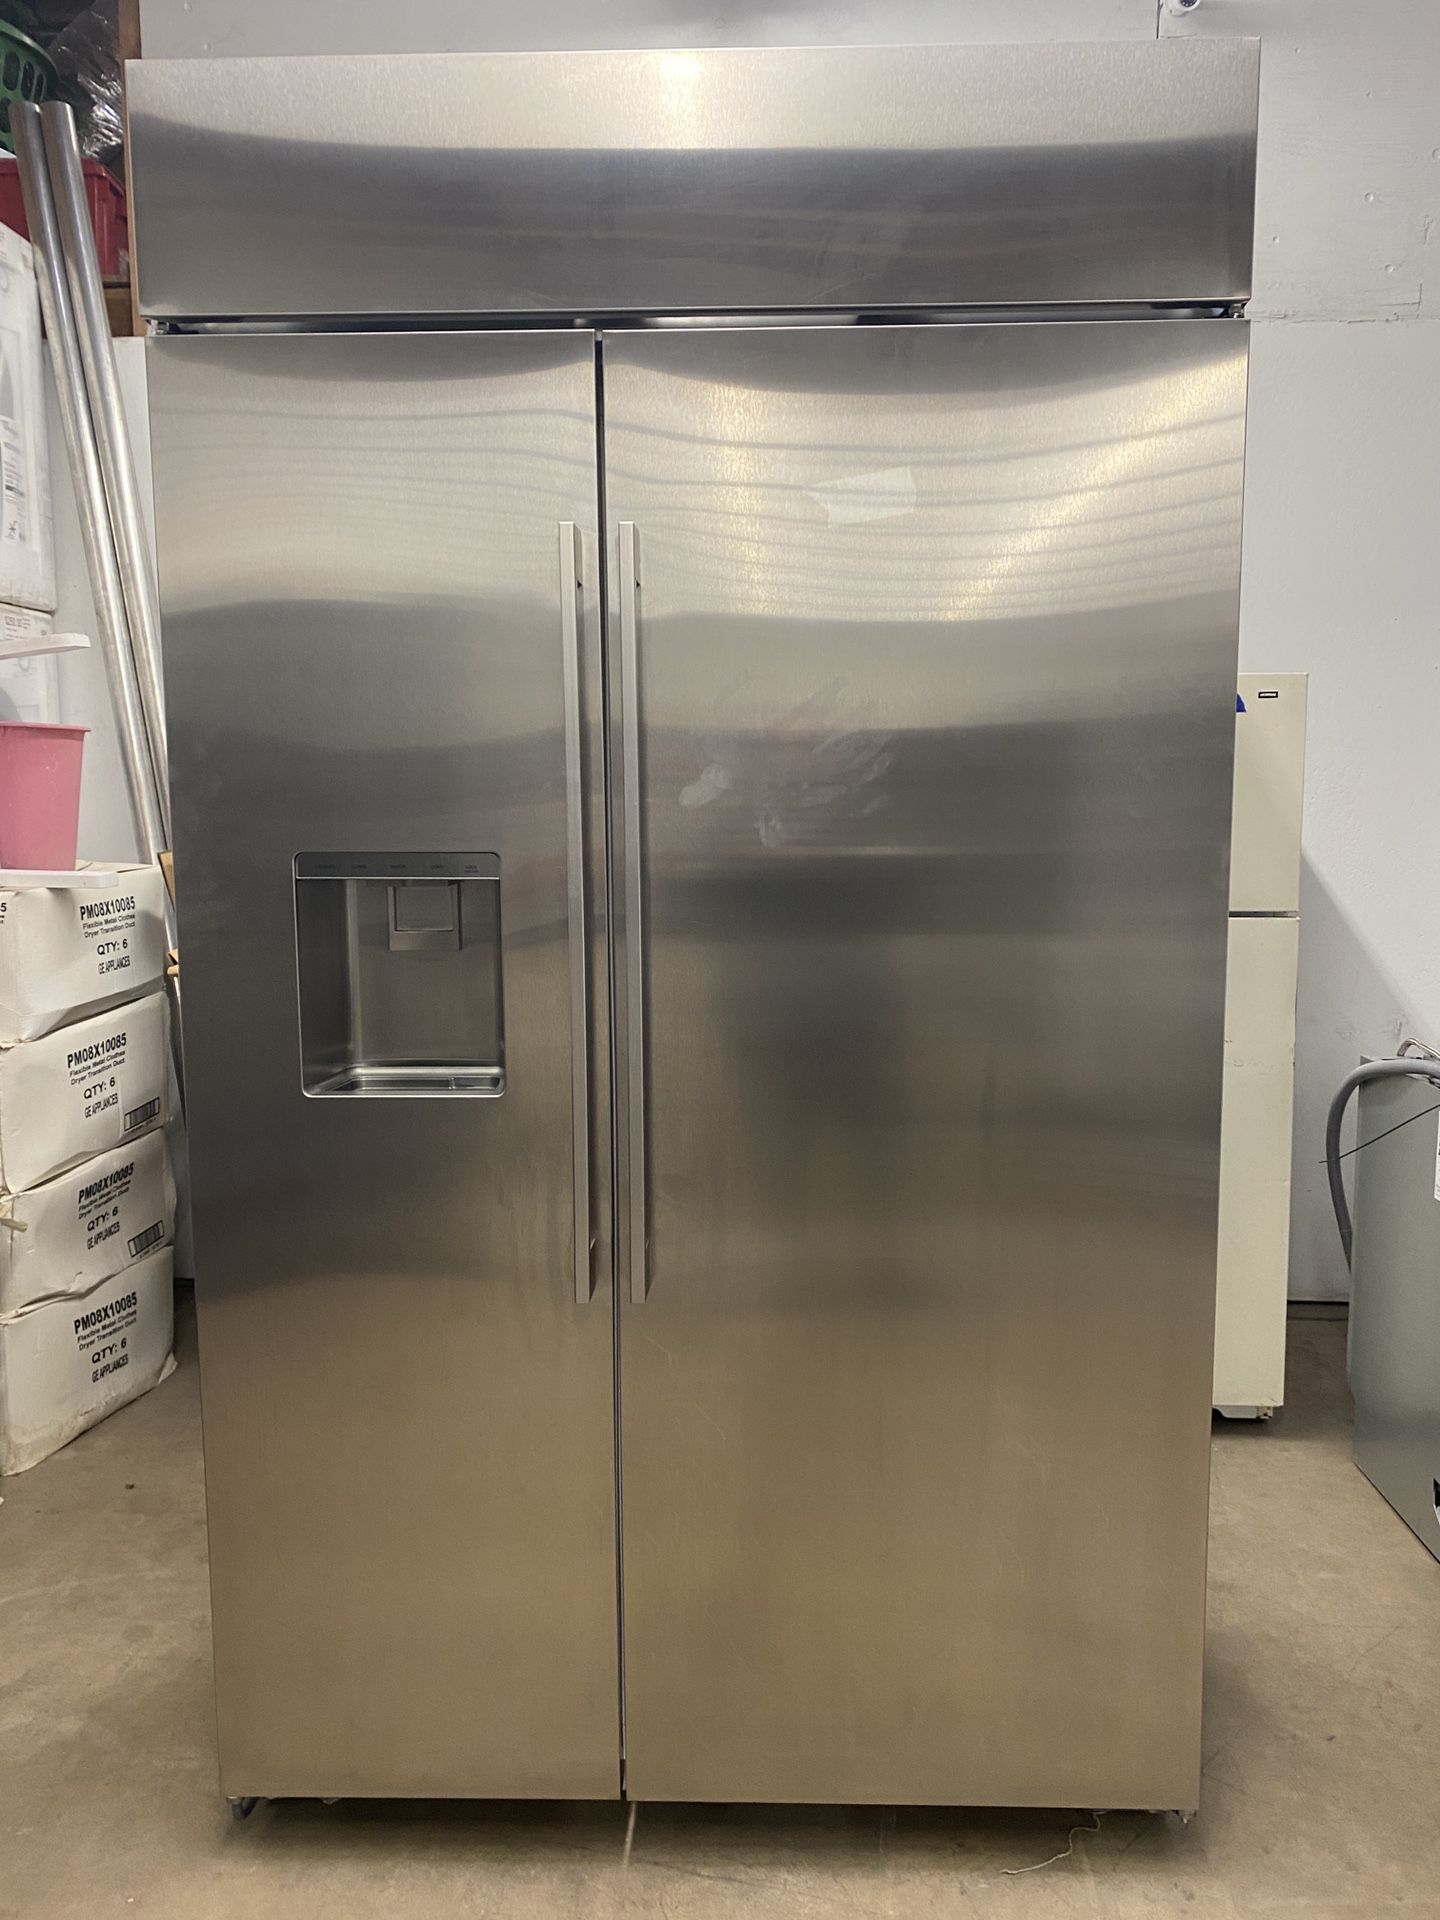 Stainless Steel GE Monogram Side By Side Built In Refrigerator and Freezer